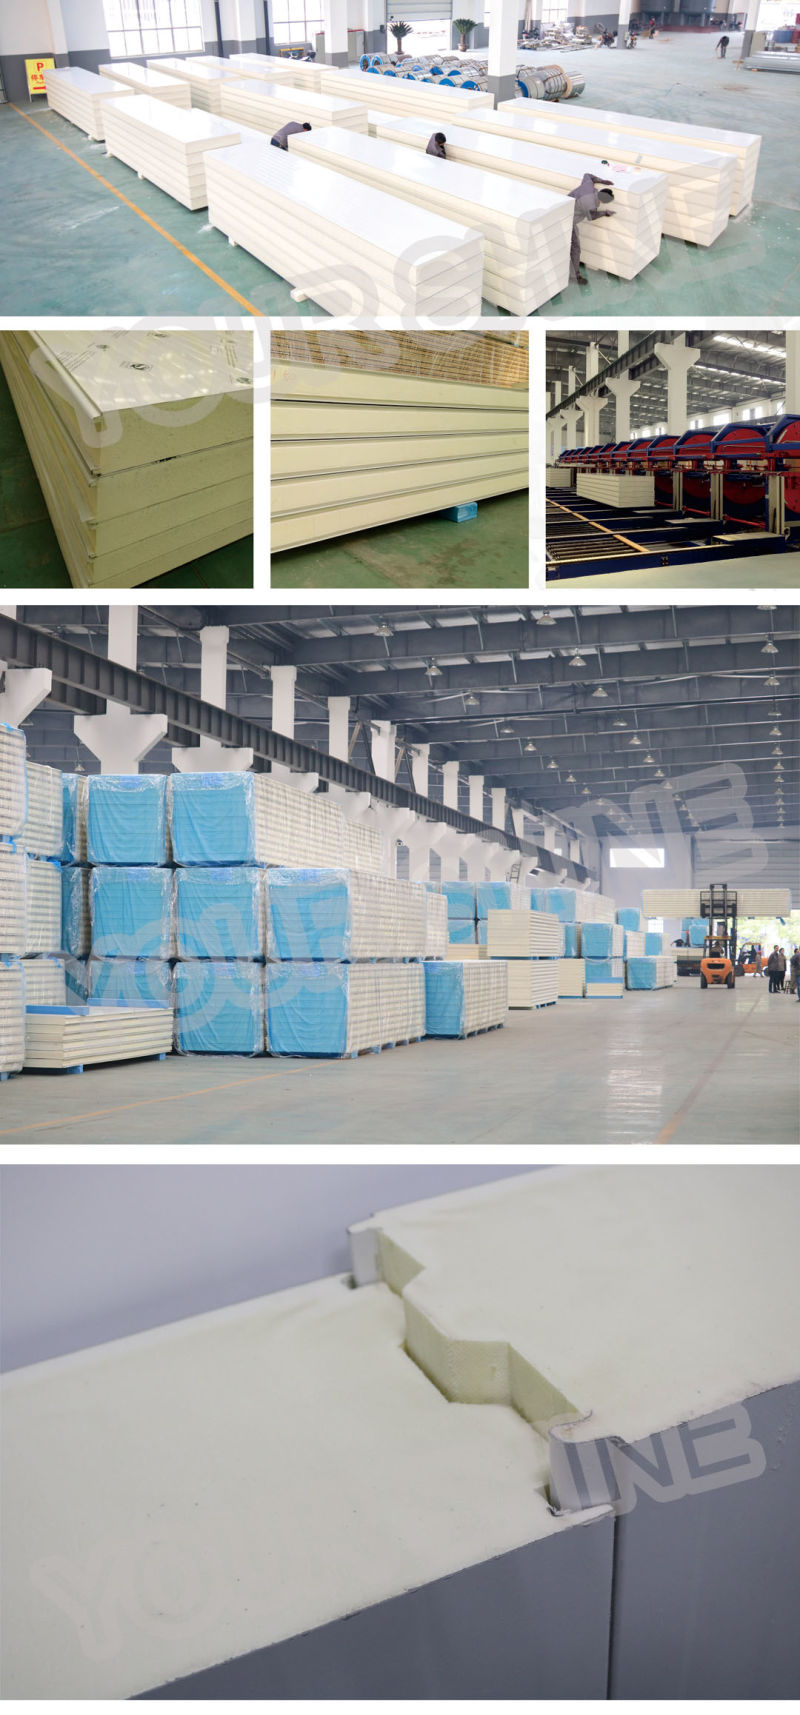 High Quality Panels Cold Storage PU Panel for Freezer Room